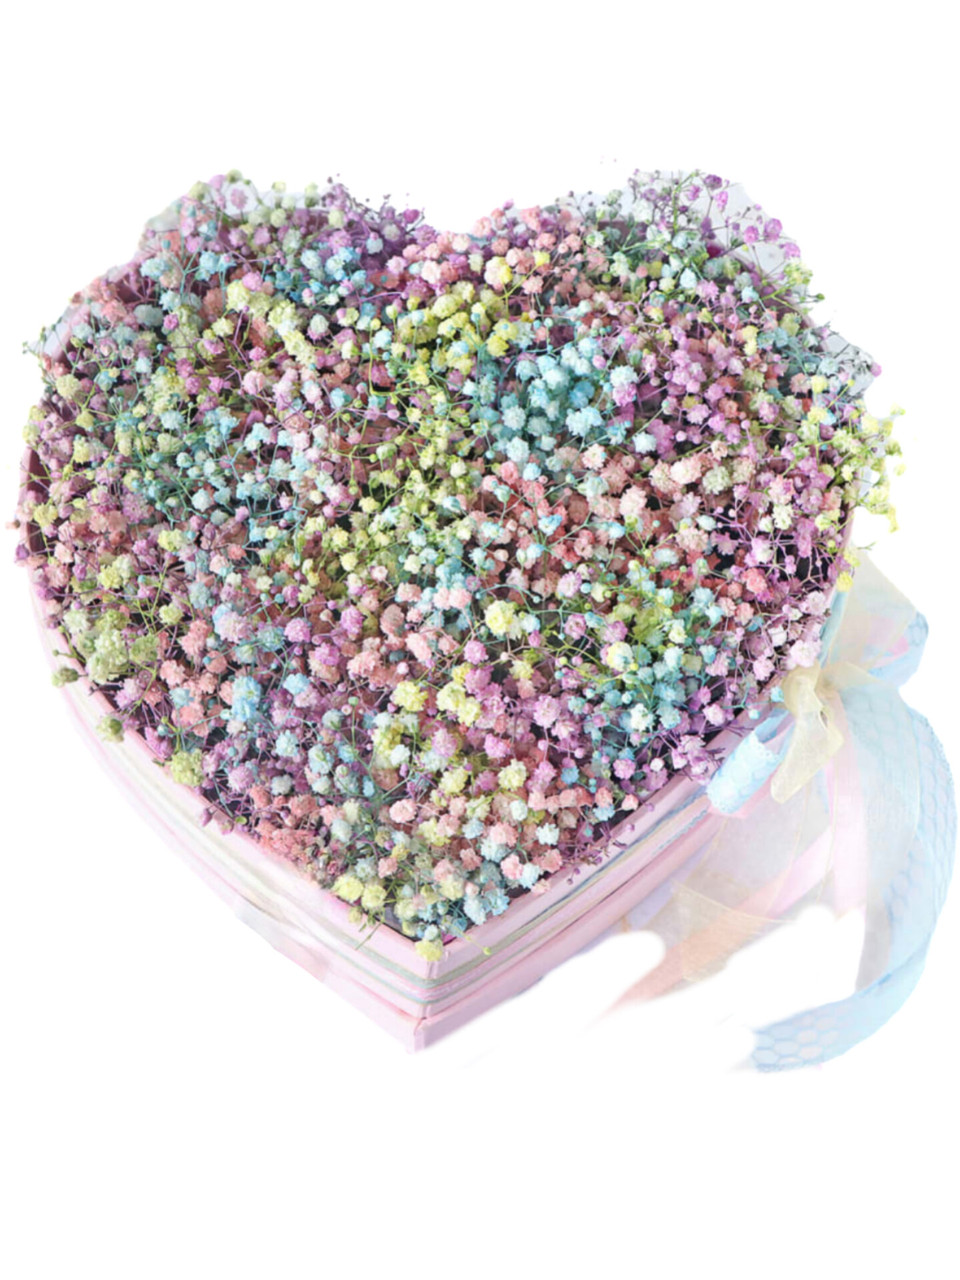 Heart Shaped Box Roses/Baby's Breath by M&J Flowers and Gifts